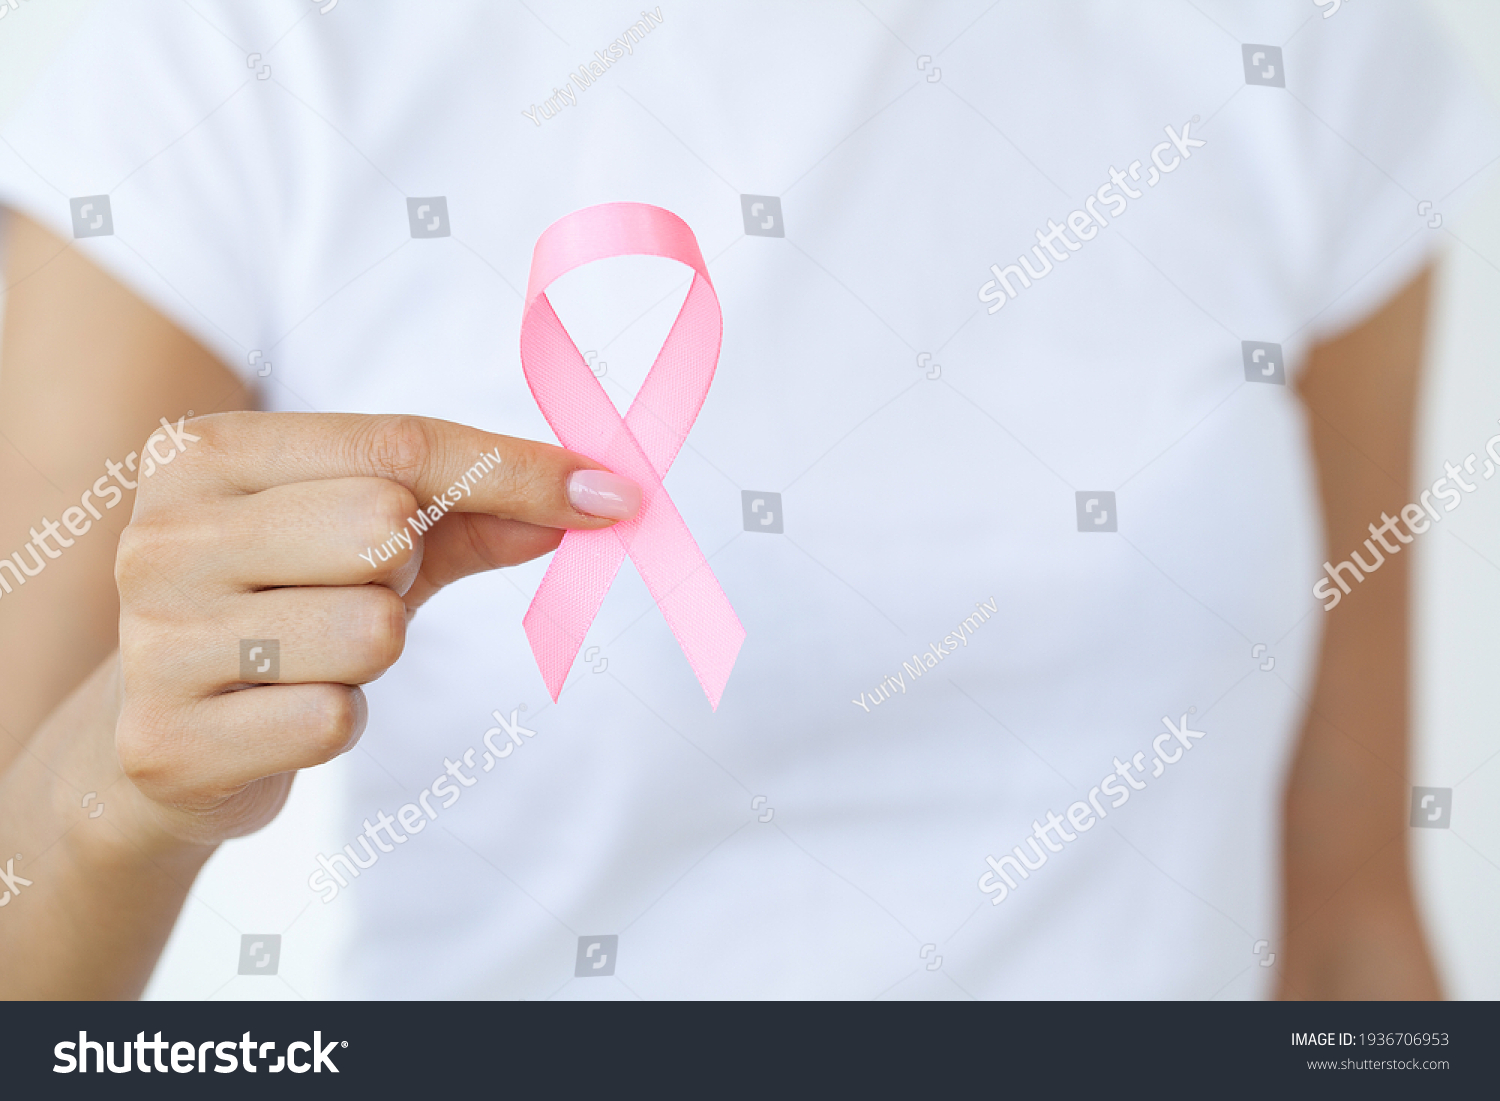 Close up of woman showing pink ribbon symbolizing breast cancer #1936706953